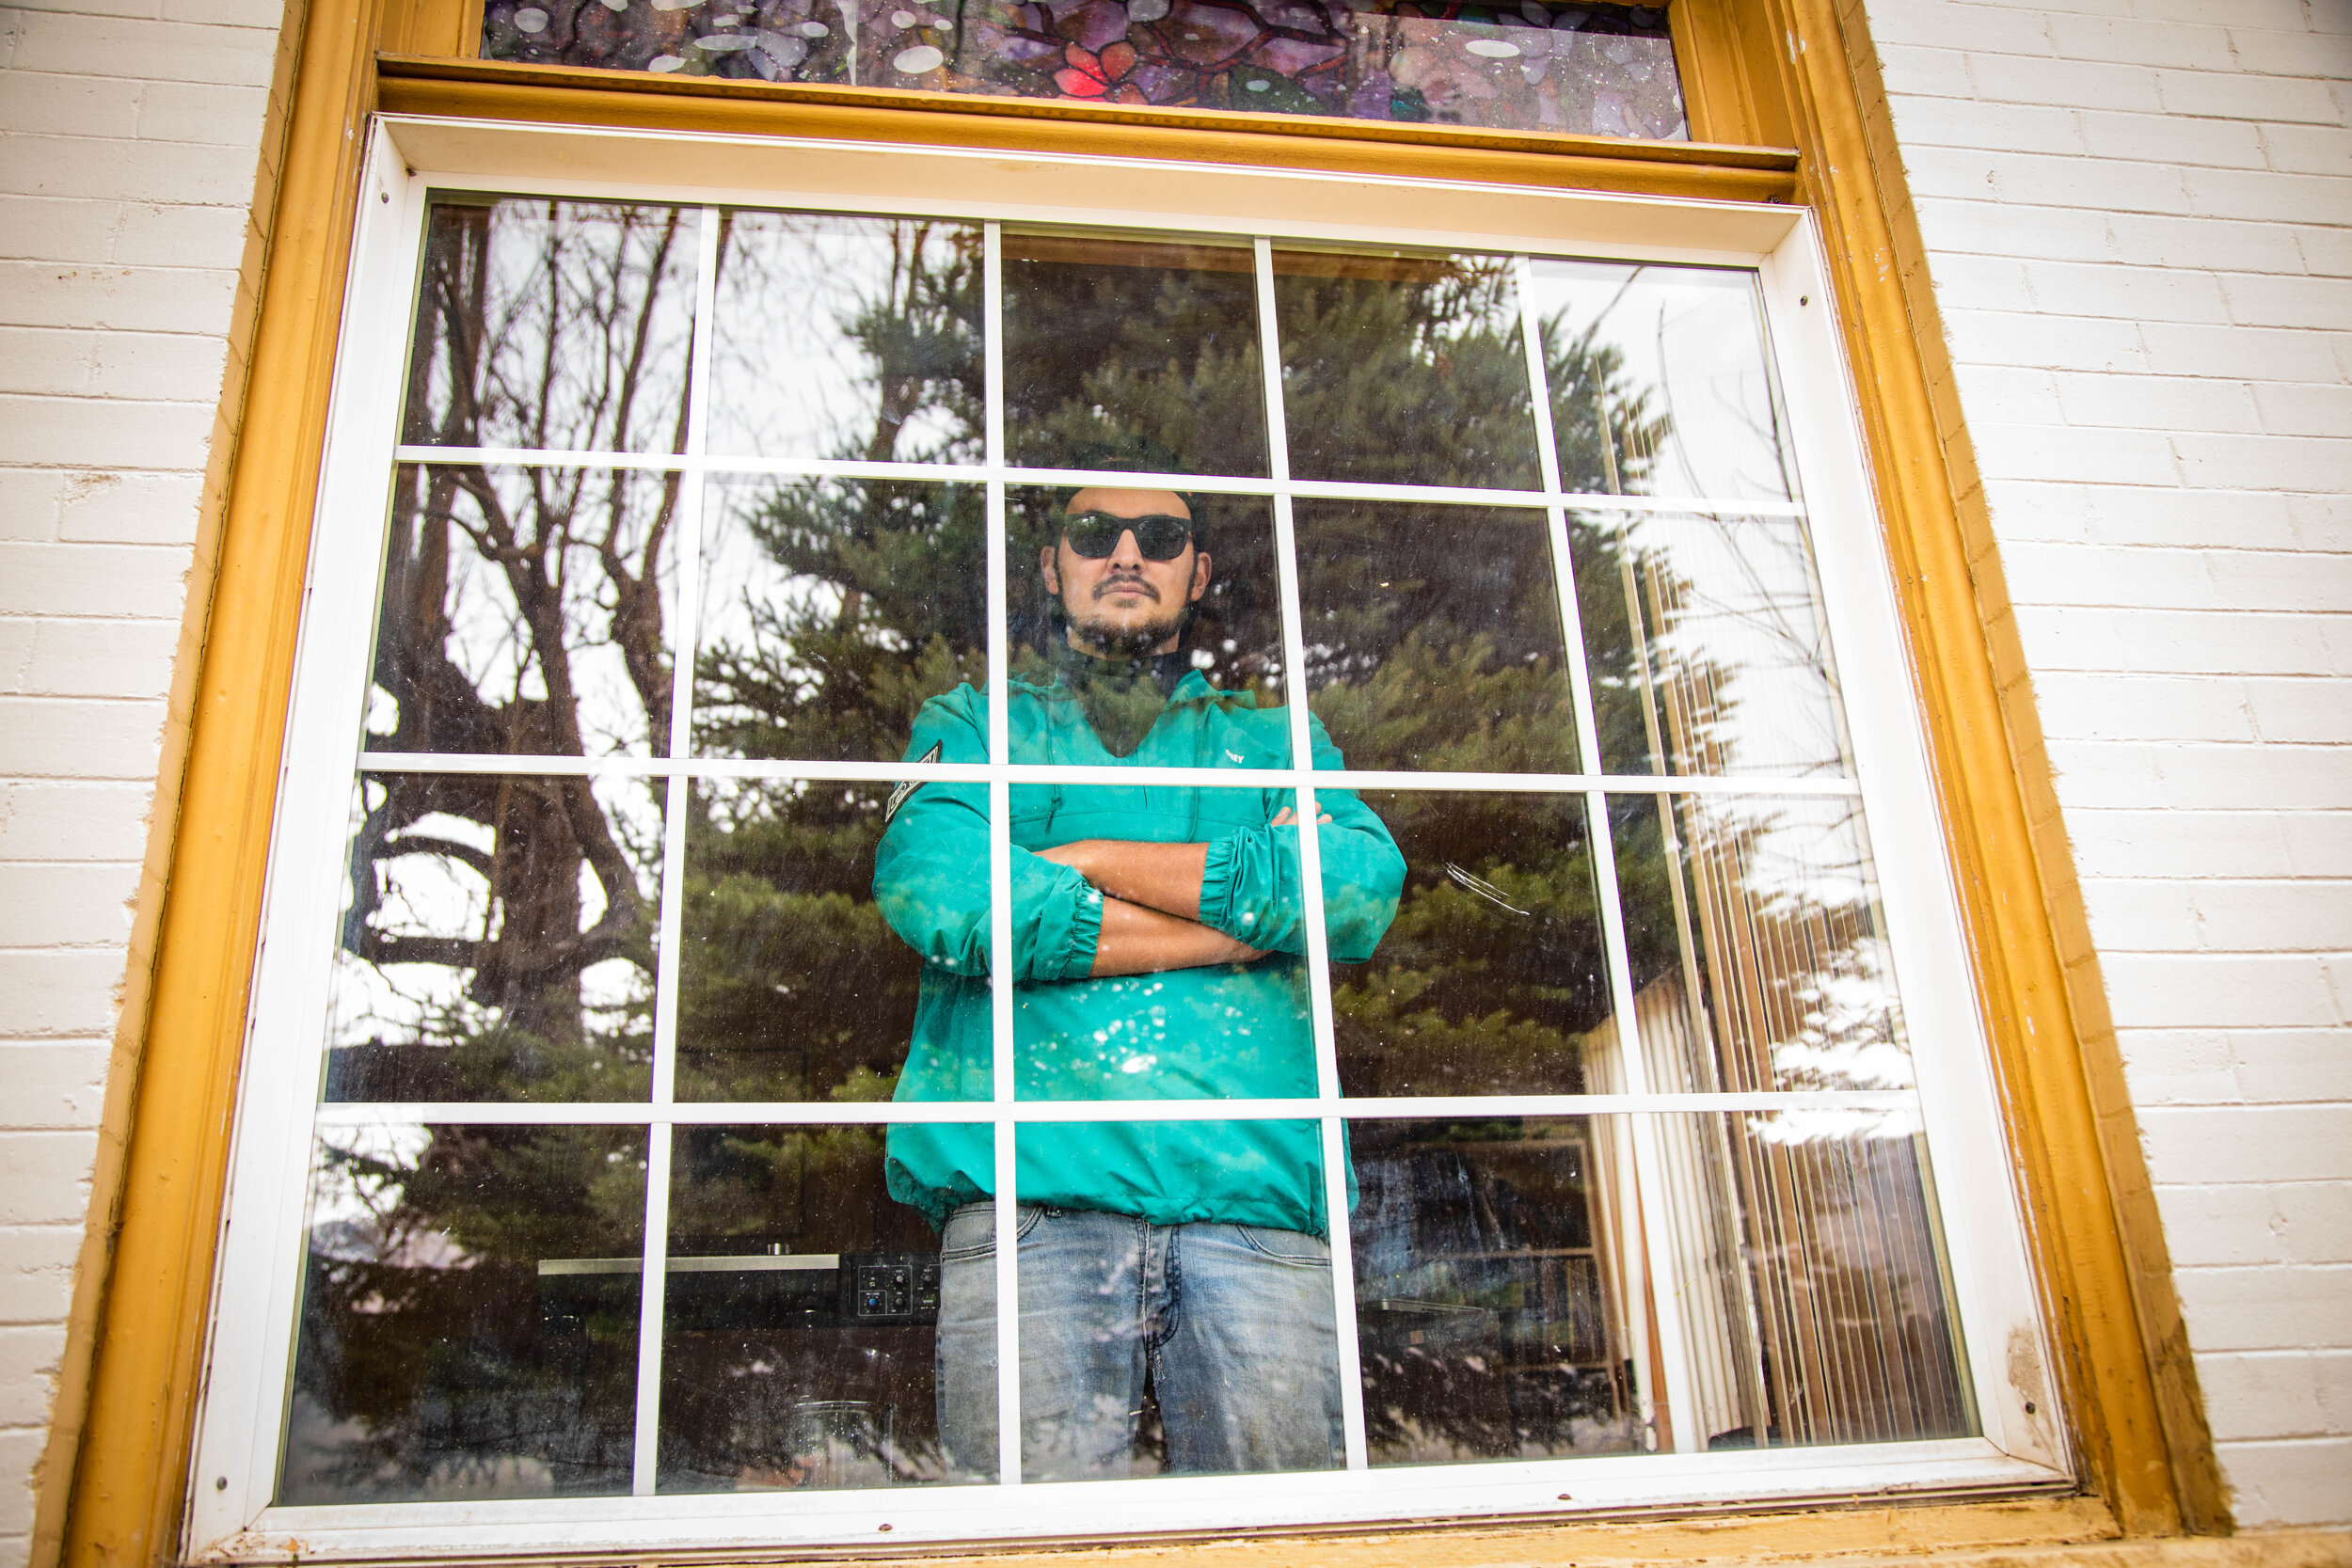  COVID-19 survivor Antonio Cruz Martinez poses for a portrait through his window on Monday, April 6, 2020, in Ogden. The 32-year-old DJ says he may have contracted the disease while playing a show in Park City in early March.   